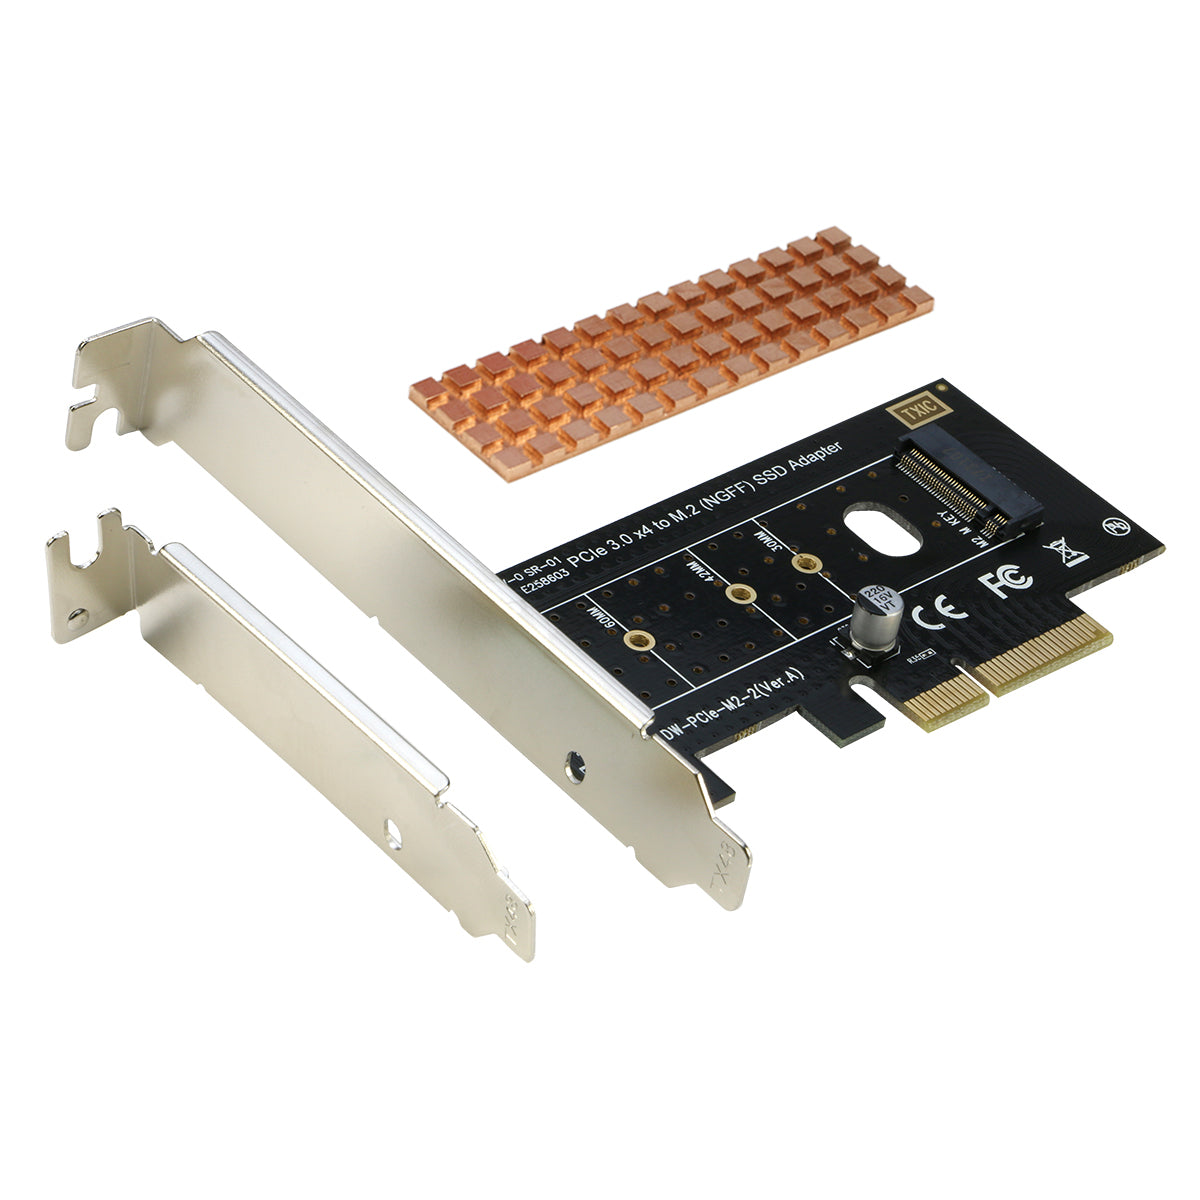 RIITOP PCI-e Nvme M.2 Adapter NVMe or AHCI M SSD to PCIe 3.0 x 4